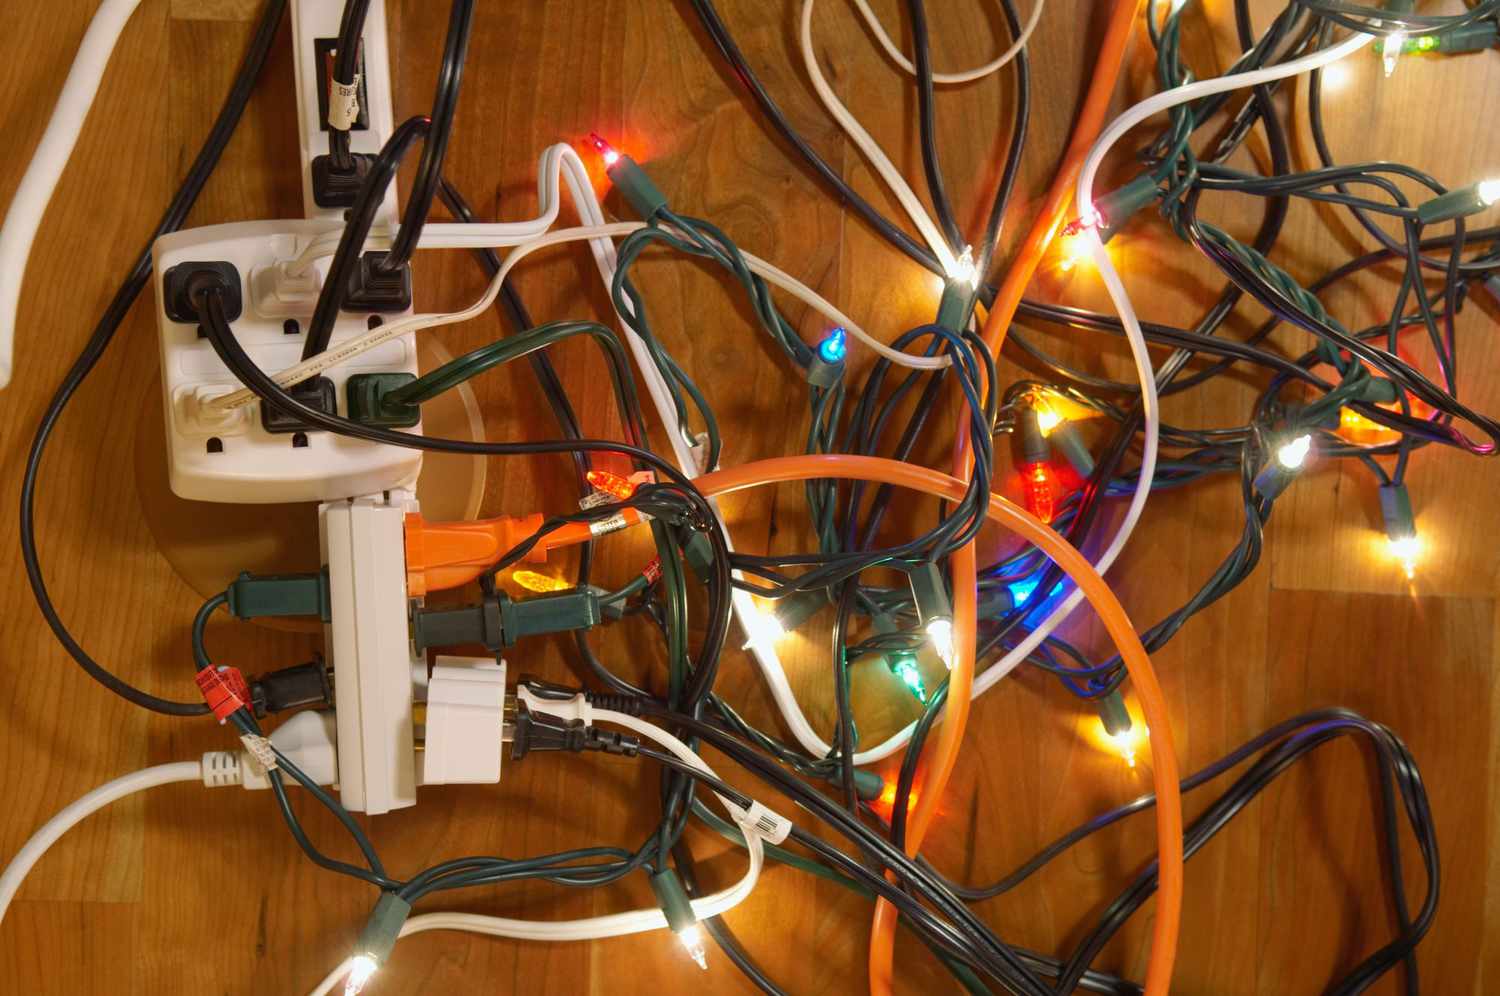 How To Connect Christmas Lights With Extension Cord